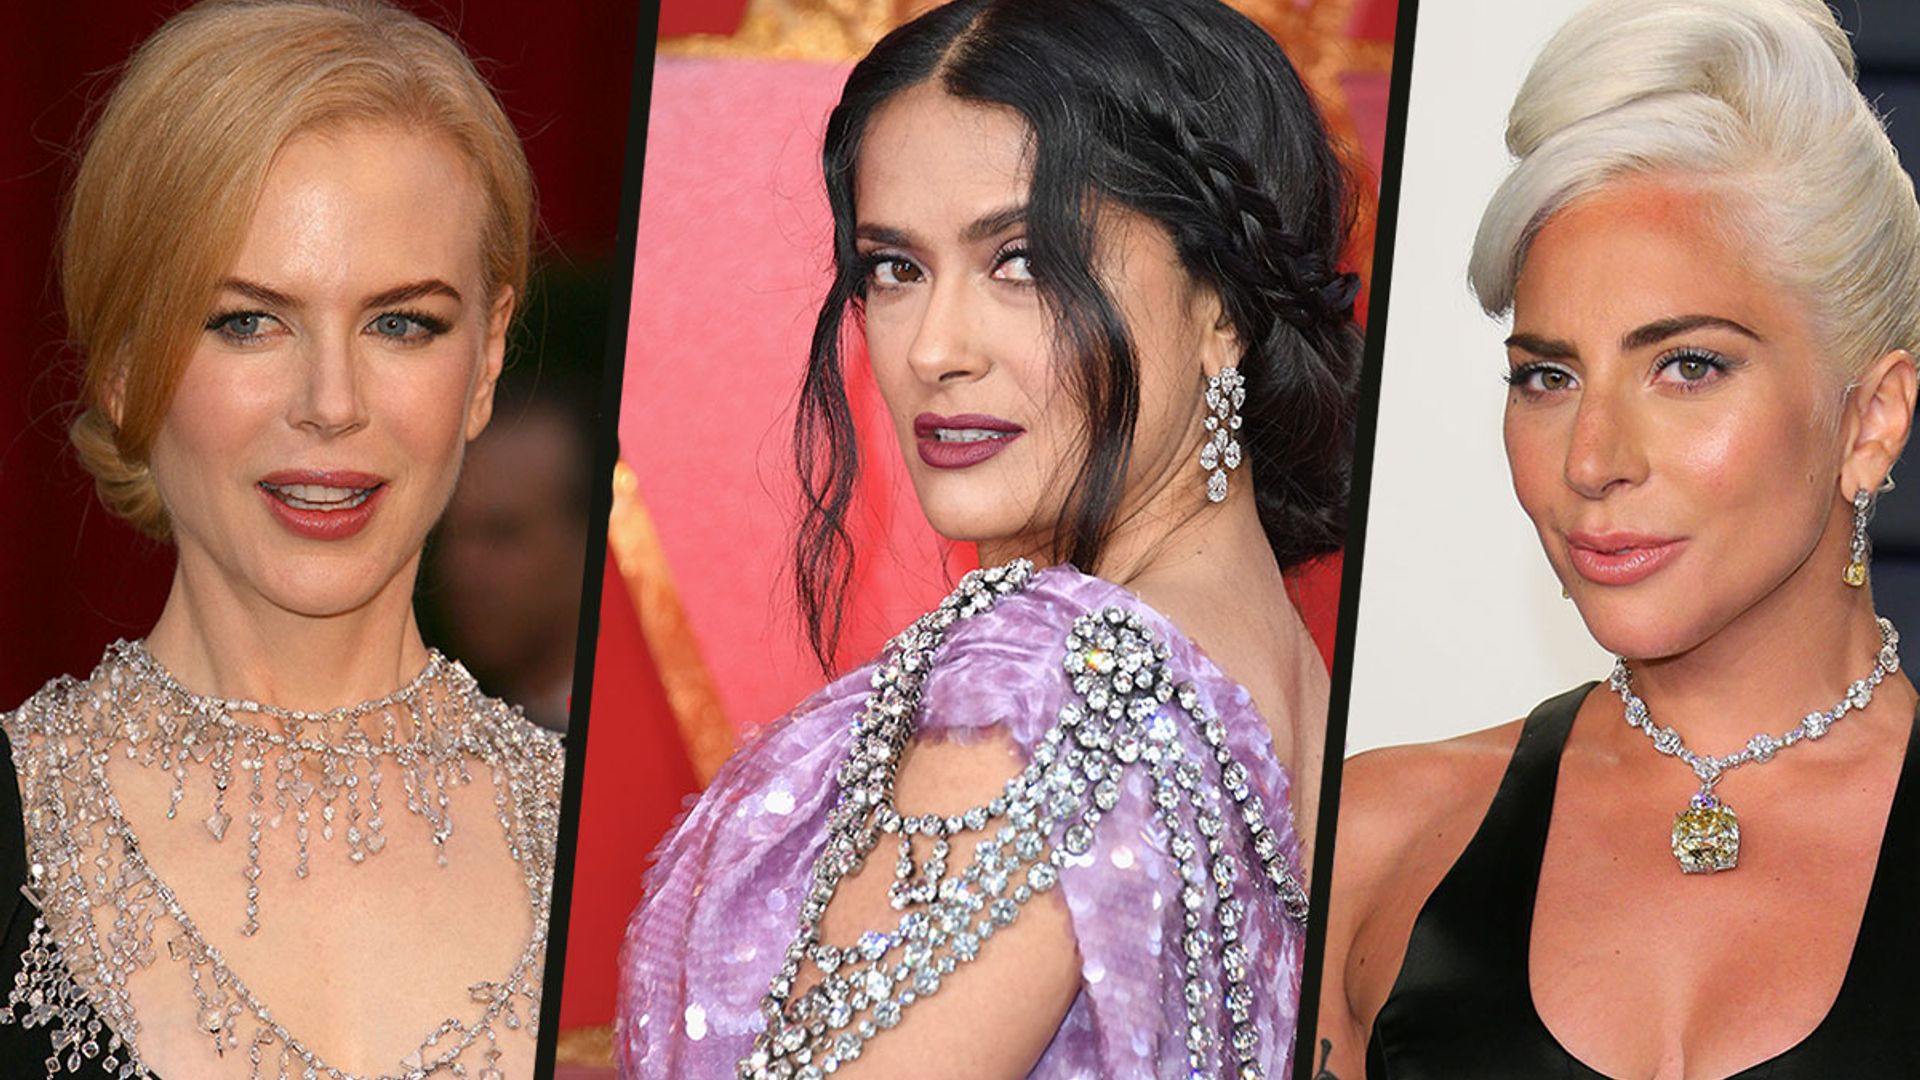 17 of the most expensive red carpet jewelry looks of all time - from the Oscars and more